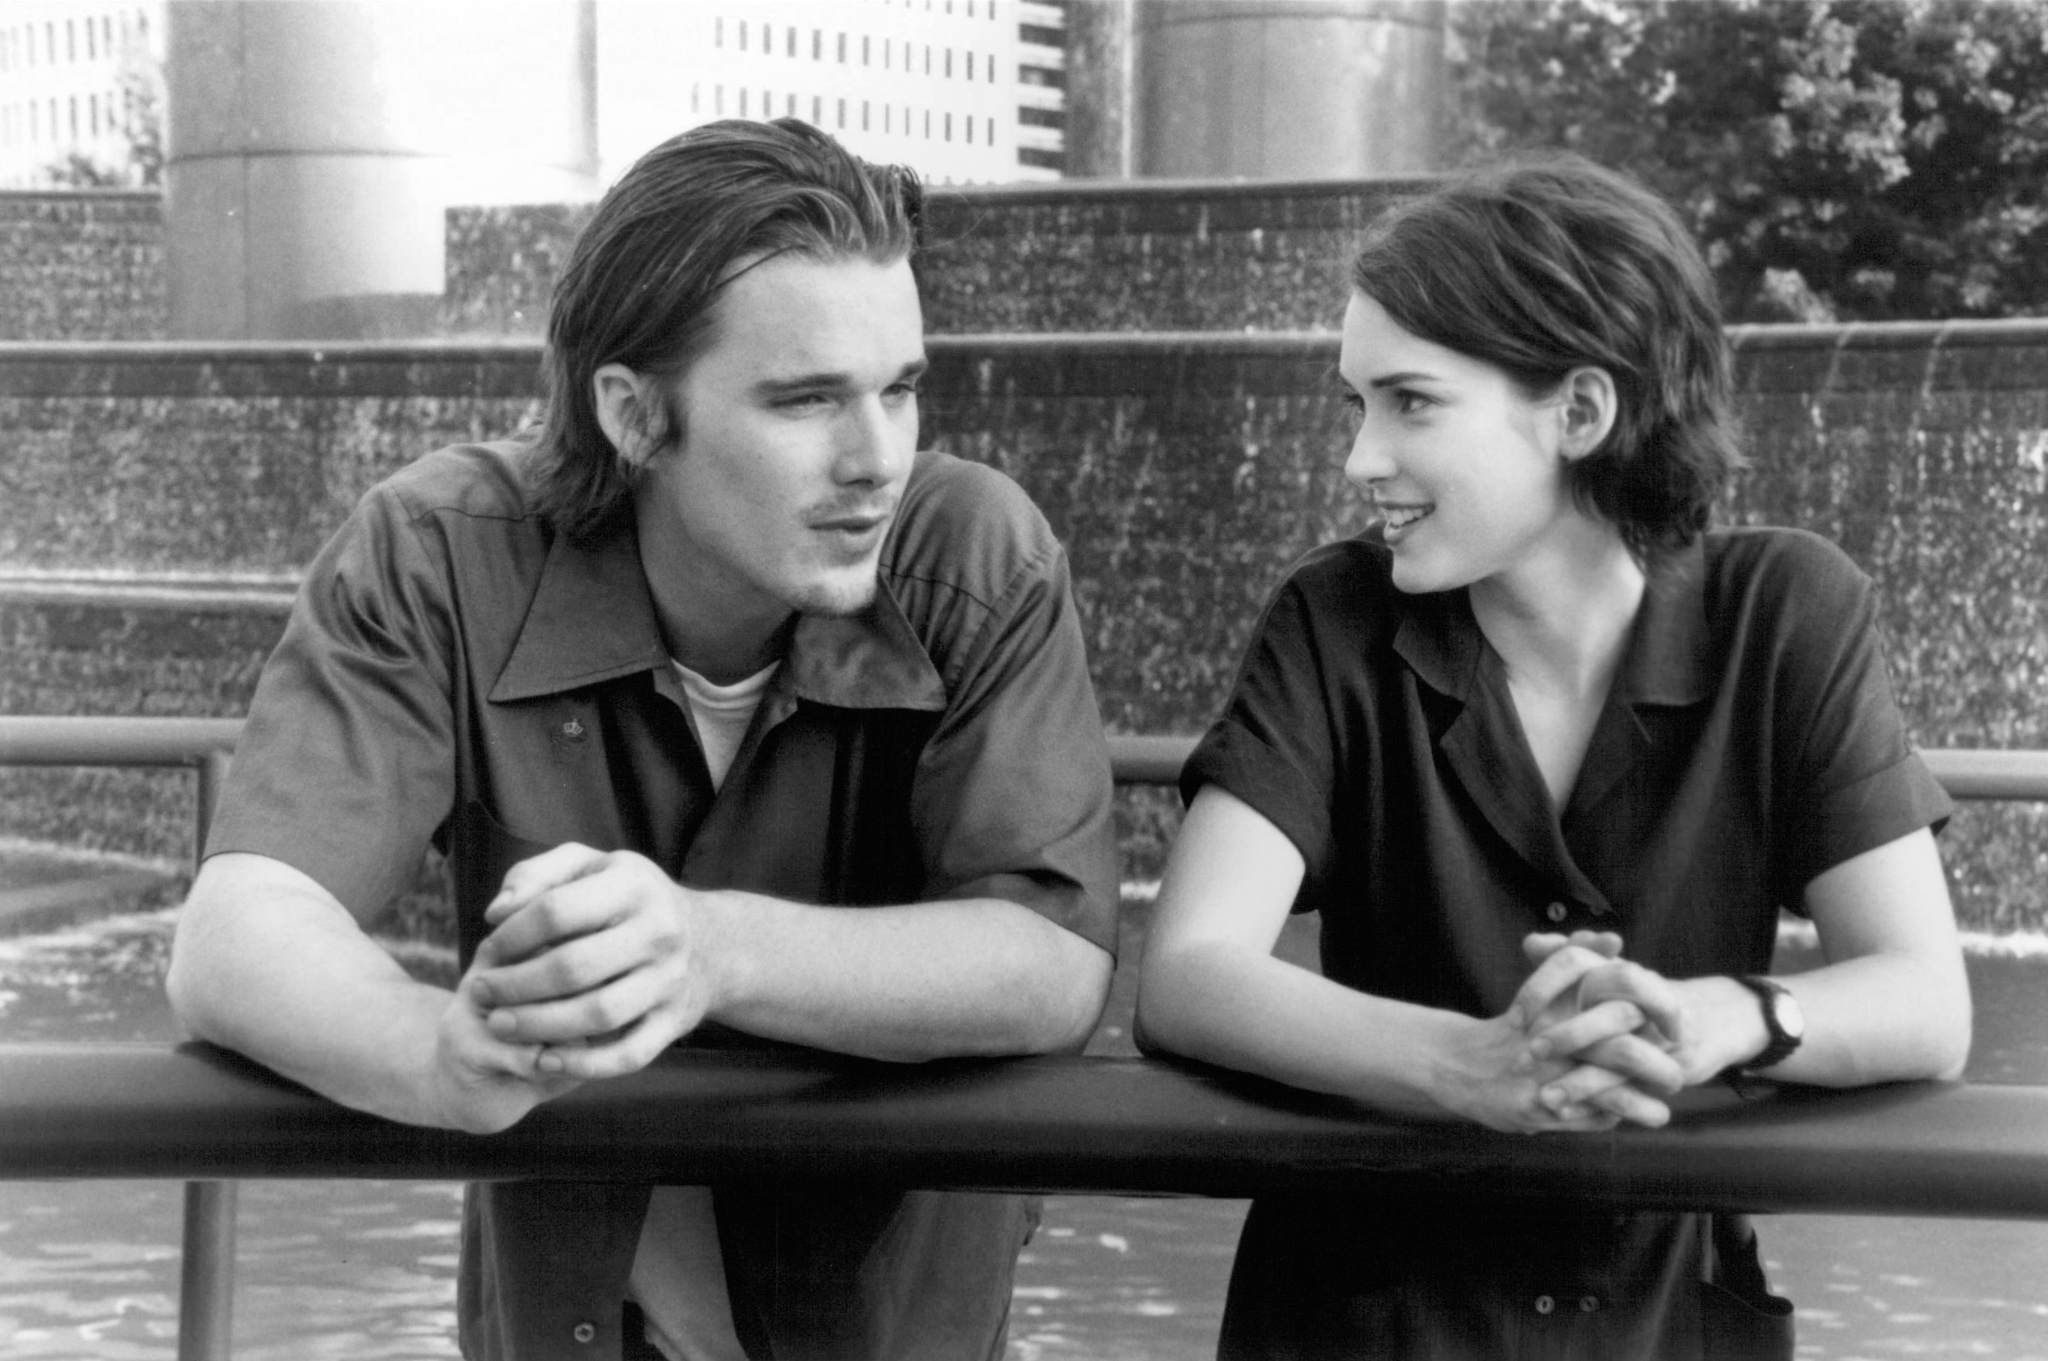 Still of Ethan Hawke and Winona Ryder in Reality Bites (1994)